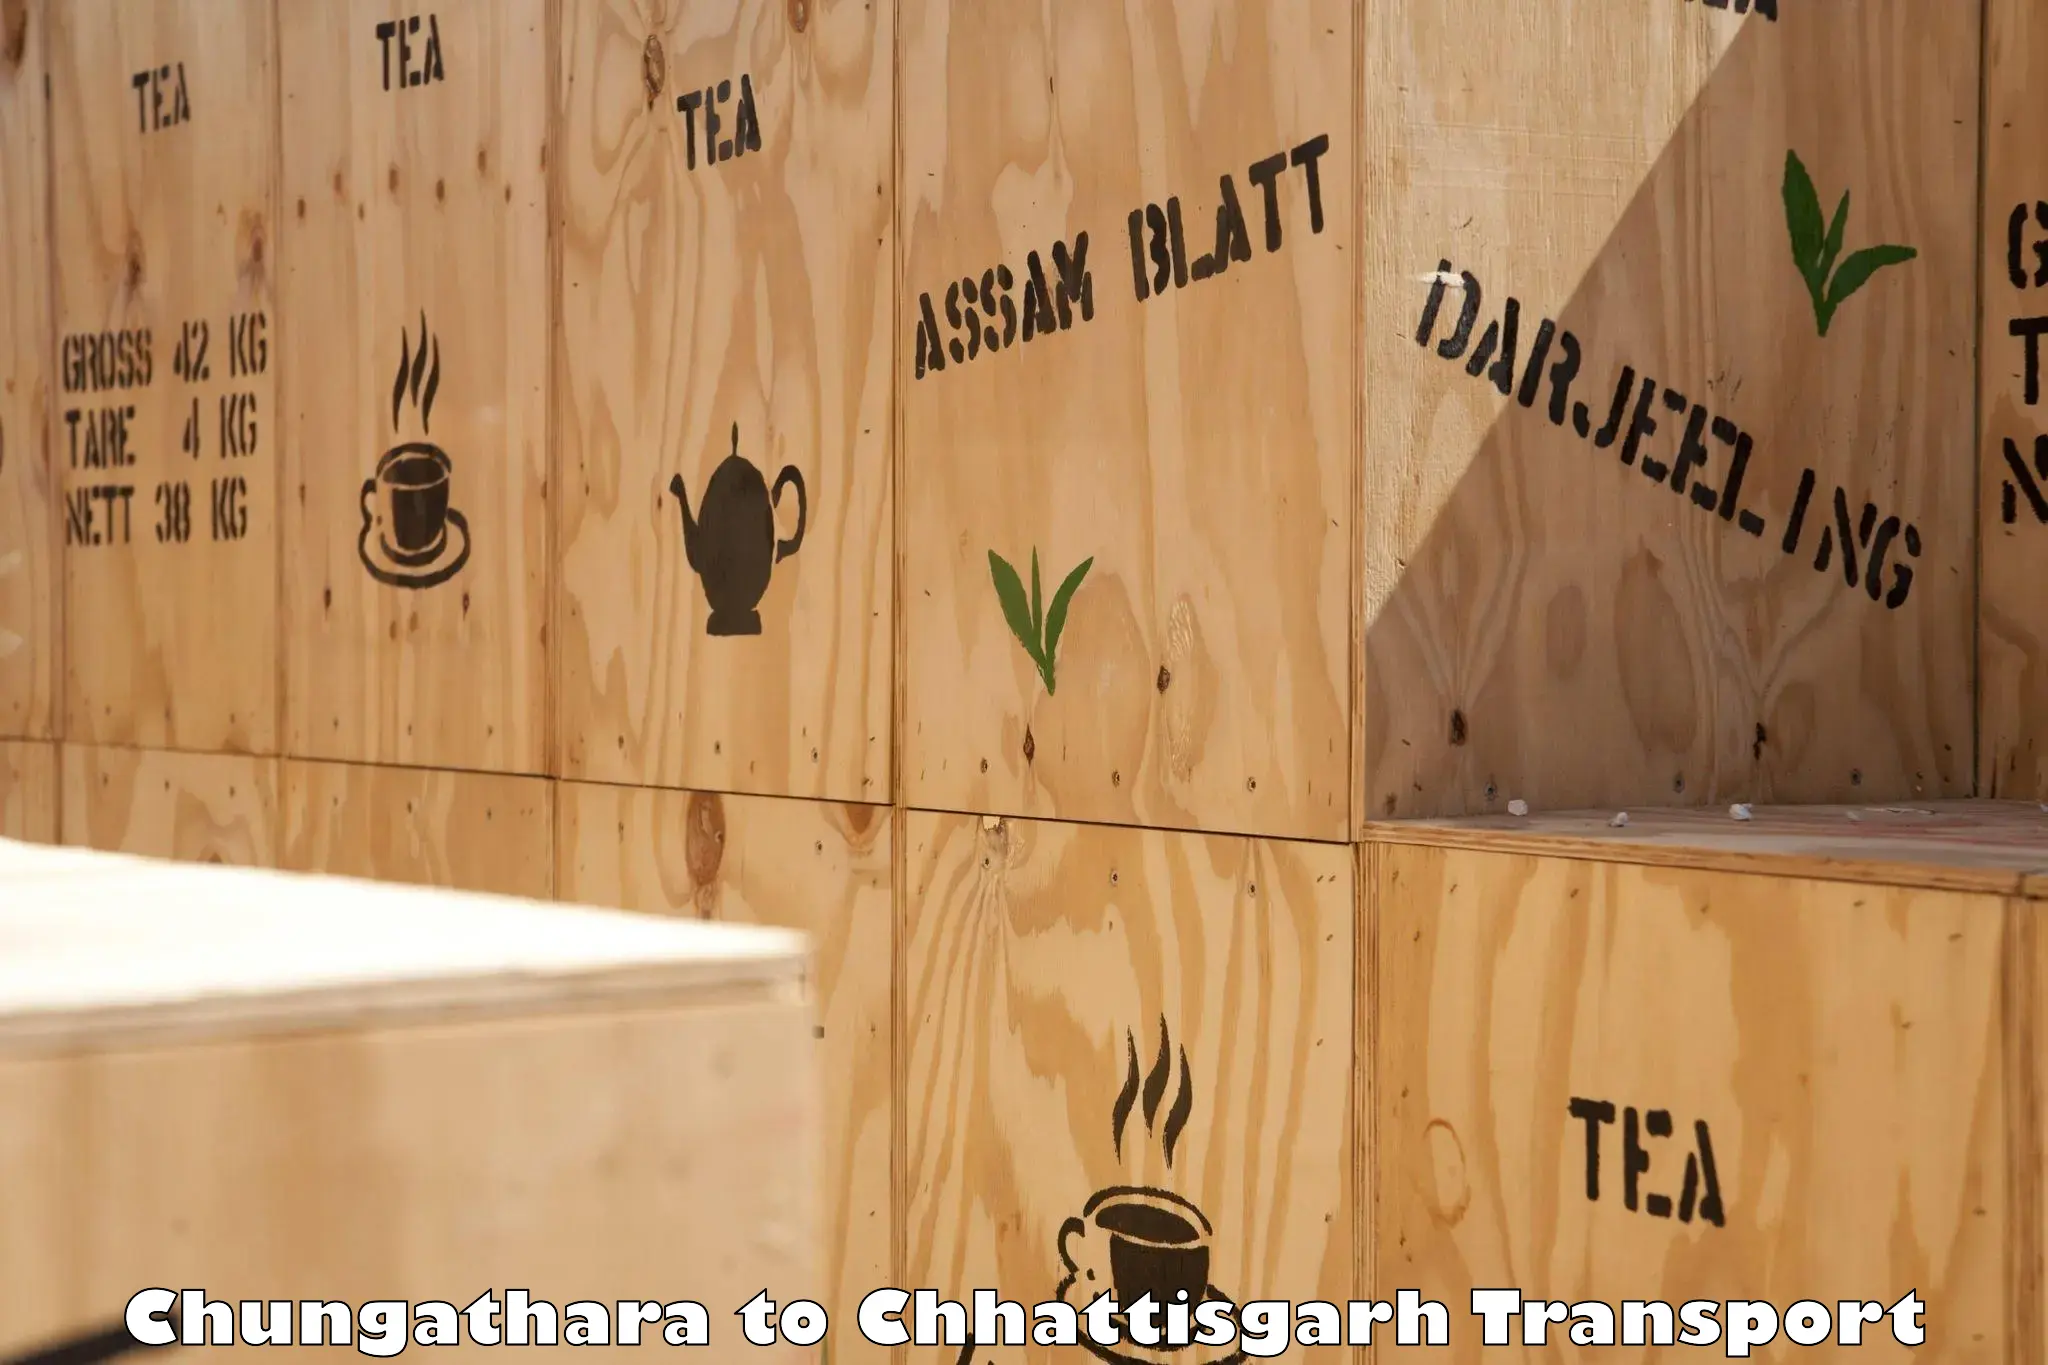 Container transport service Chungathara to Charama